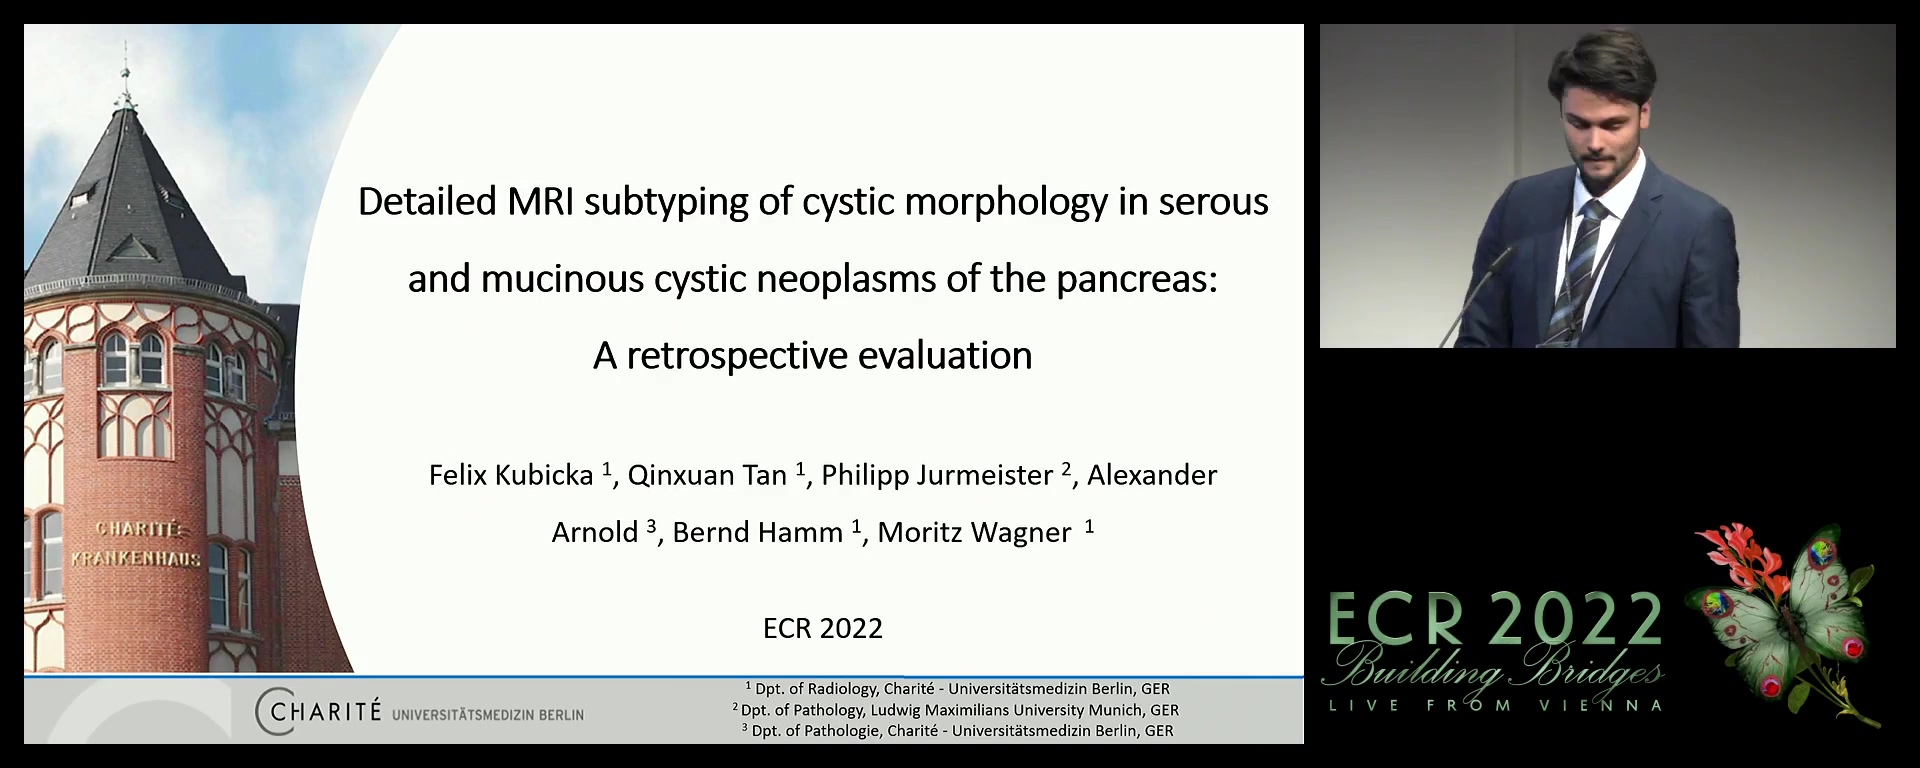 Detailed MRI subtyping of cystic morphology in serous and mucinous cystic neoplasms of the pancreas: a retrospective evaluation